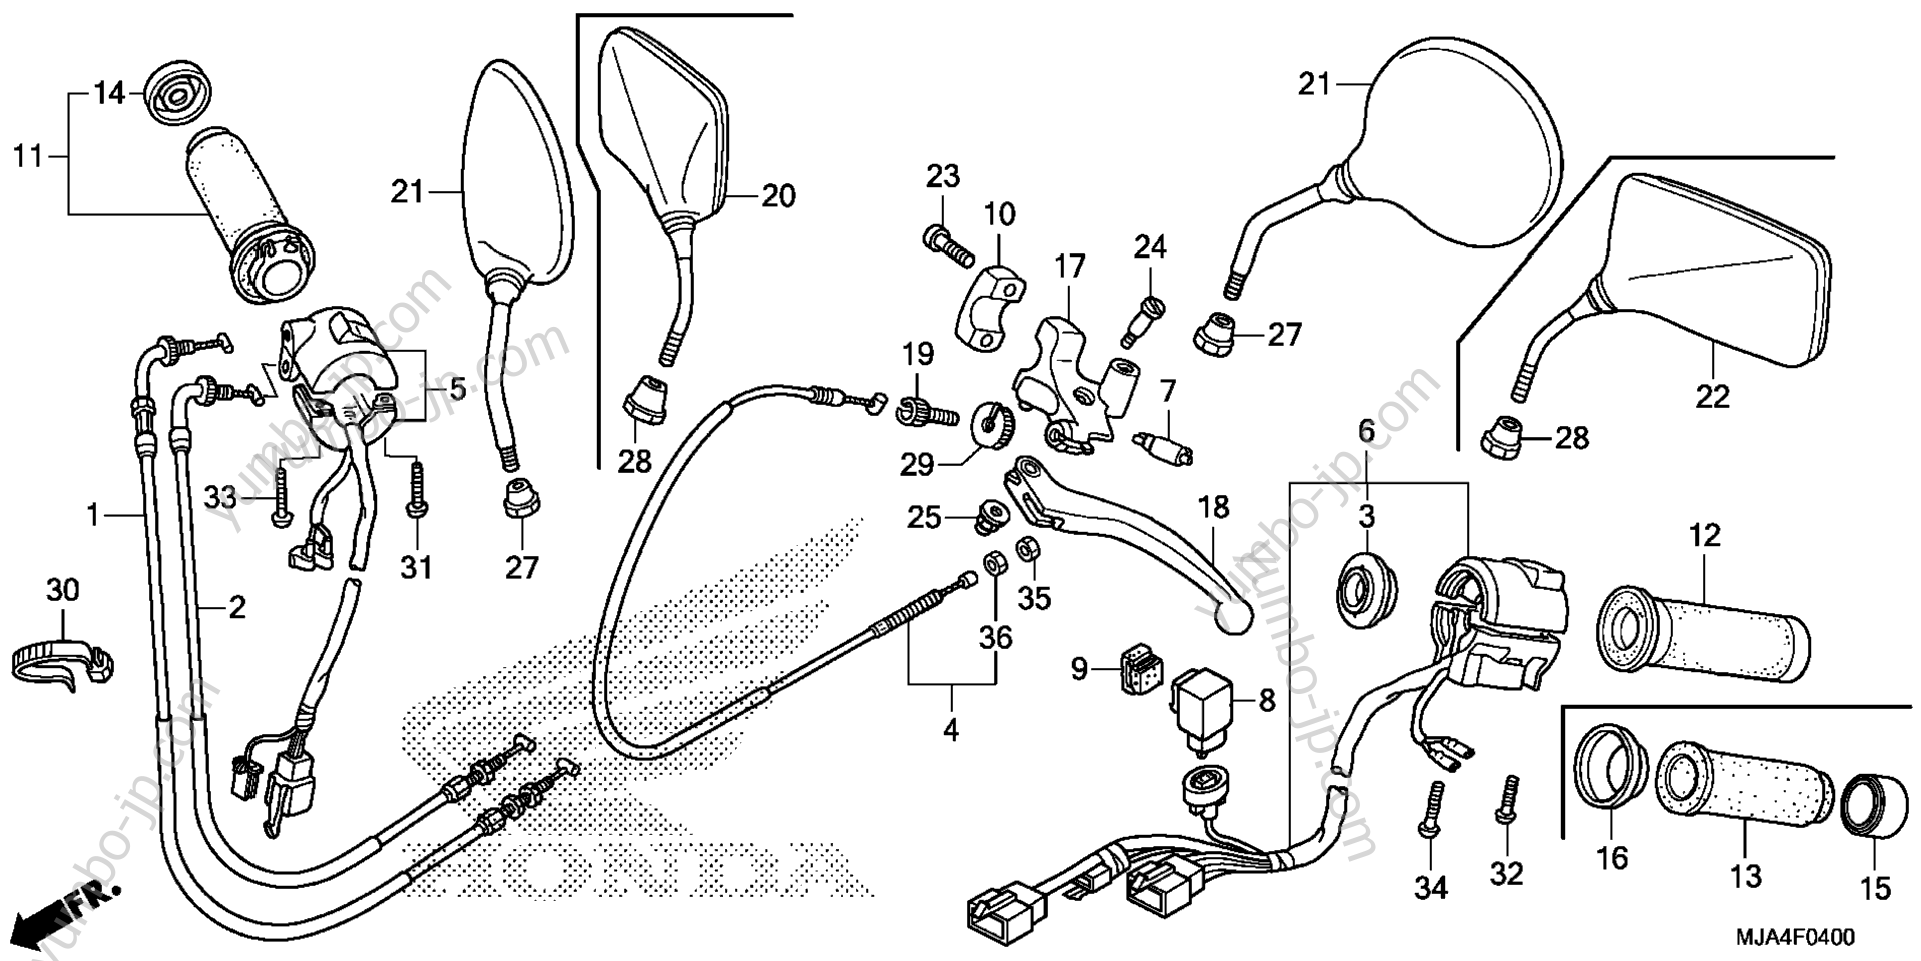 HANDLE LEVER / SWITCH / CABLE for motorcycles HONDA VT750RS AC 2012 year